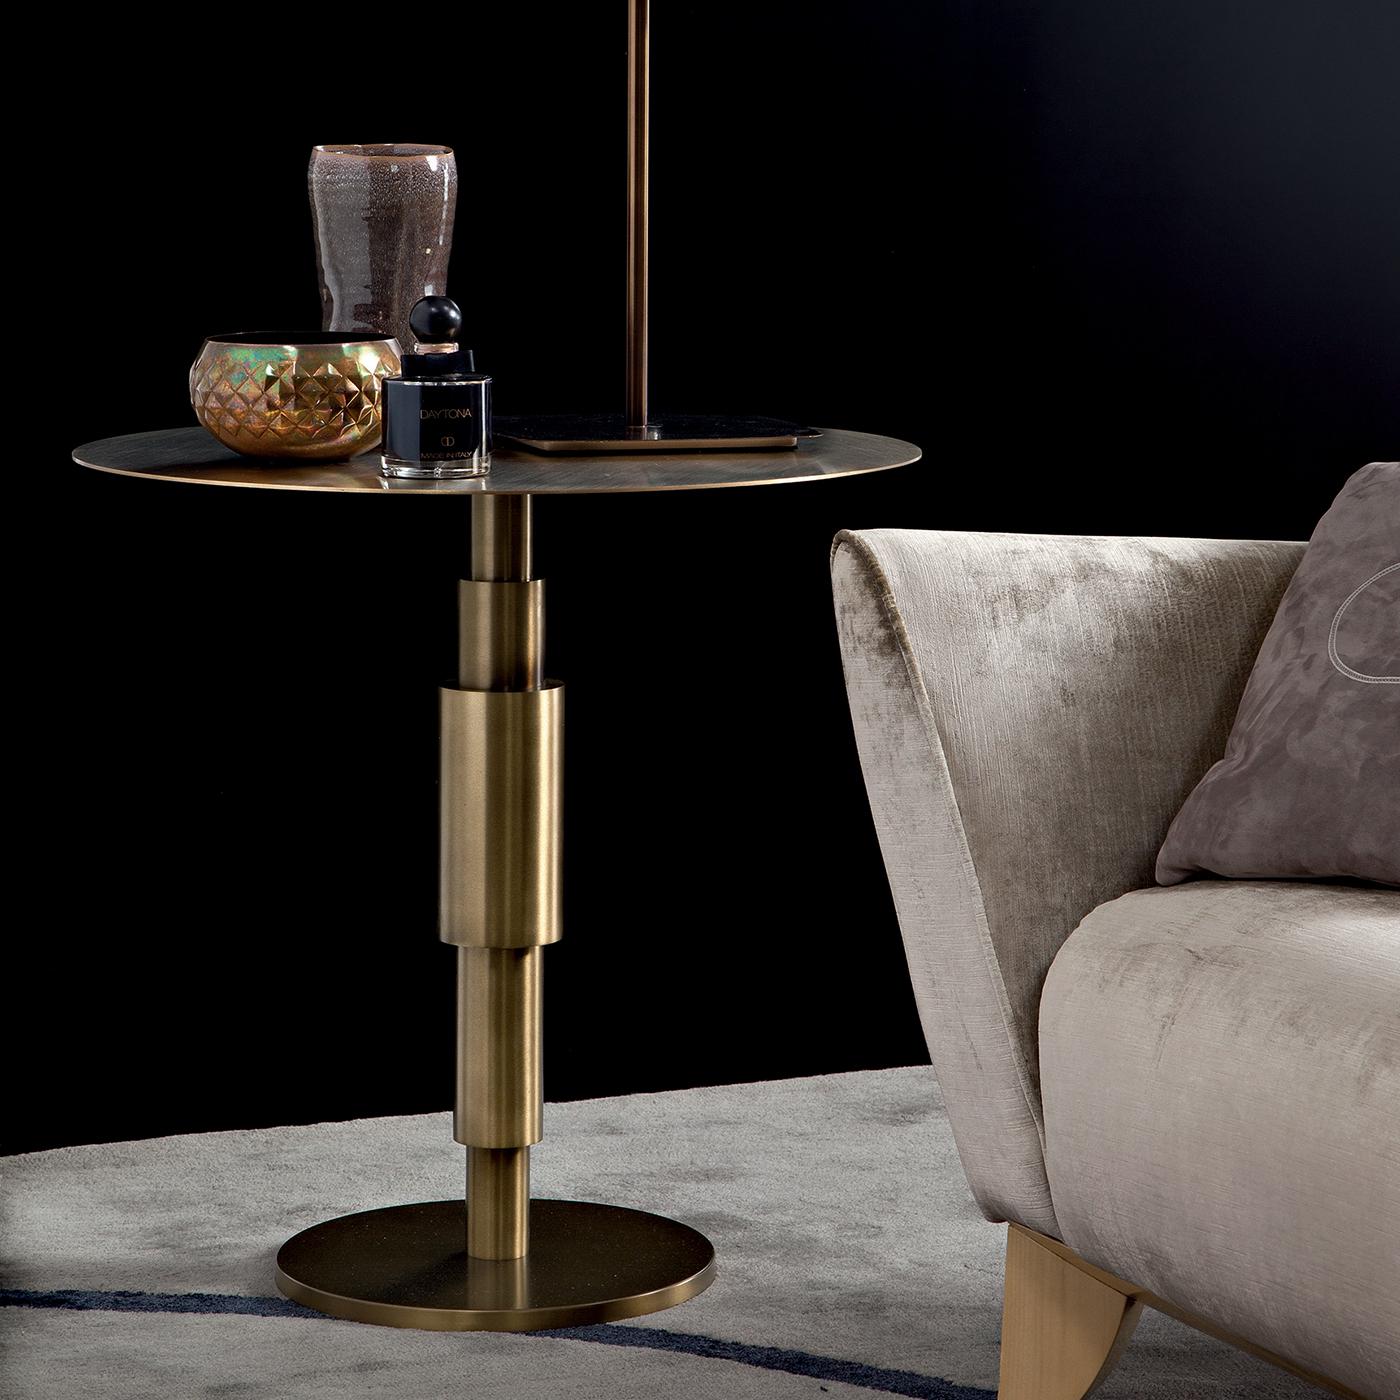 Alone or in a group, this striking side table will make the most lustrous statement in a contemporary living room, particularly with monochromatic furnishing. The small circular base and the unique concentric tubular pedestal form the structure in